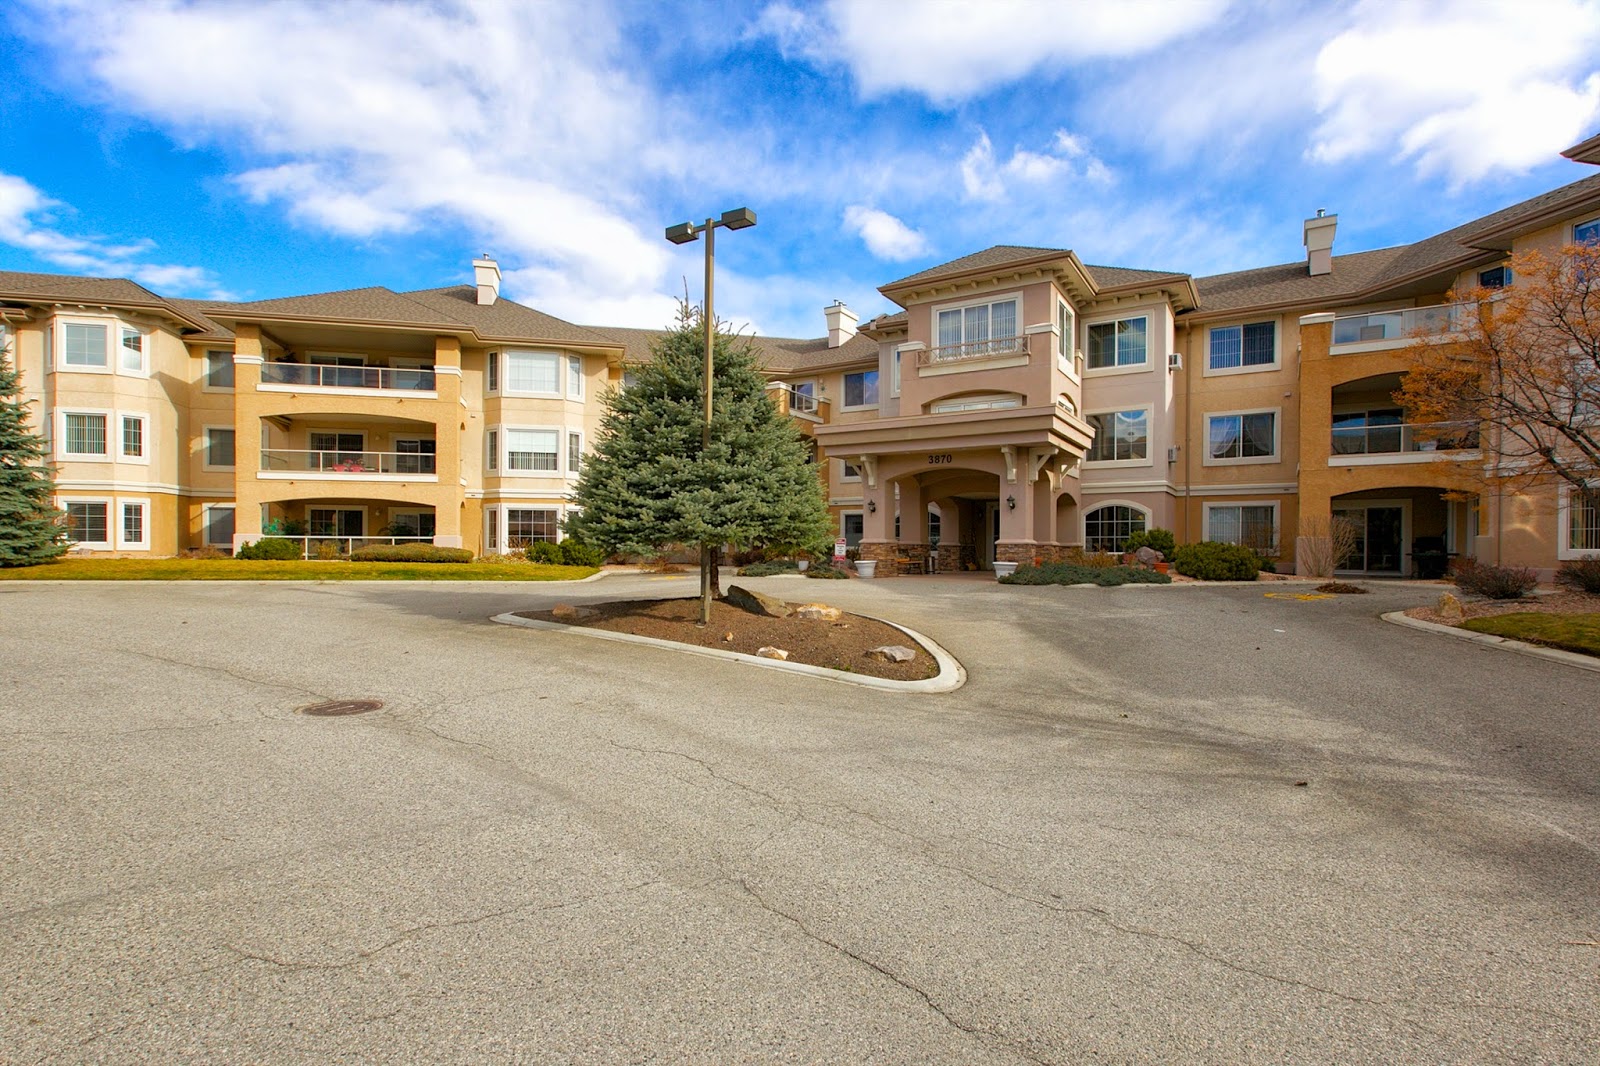 Real Estate West Kelowna REALTOR\u00ae: Just Listed! Immpressive Condo at Monticello, an Adult Complex